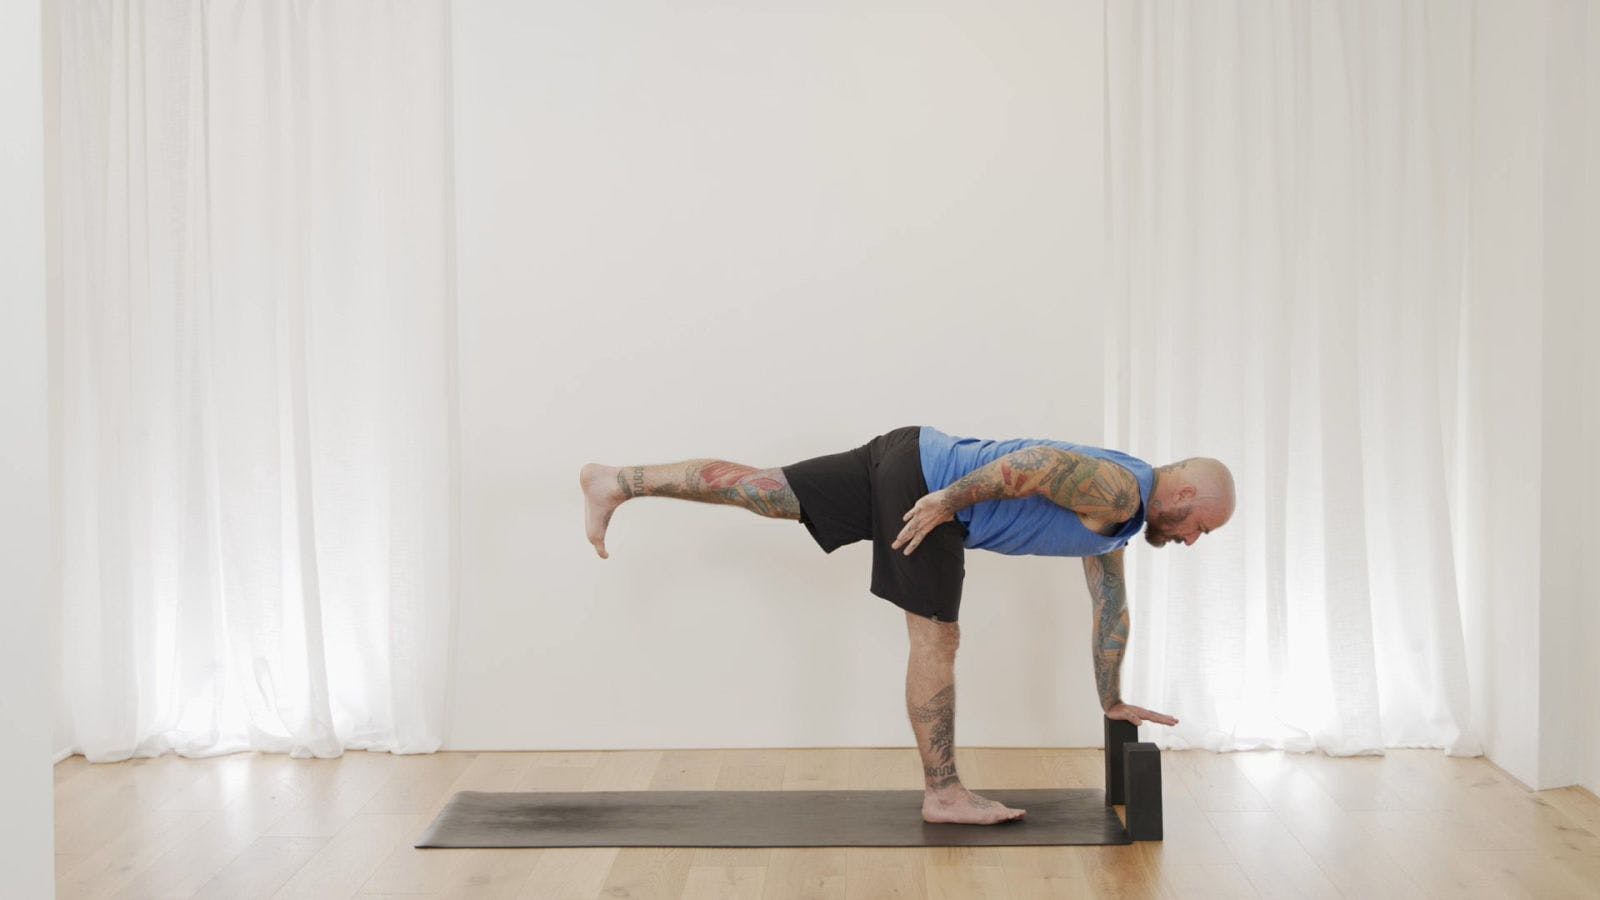 Yoga Foundations - Work Your Warrior 3 with Ari Levanael